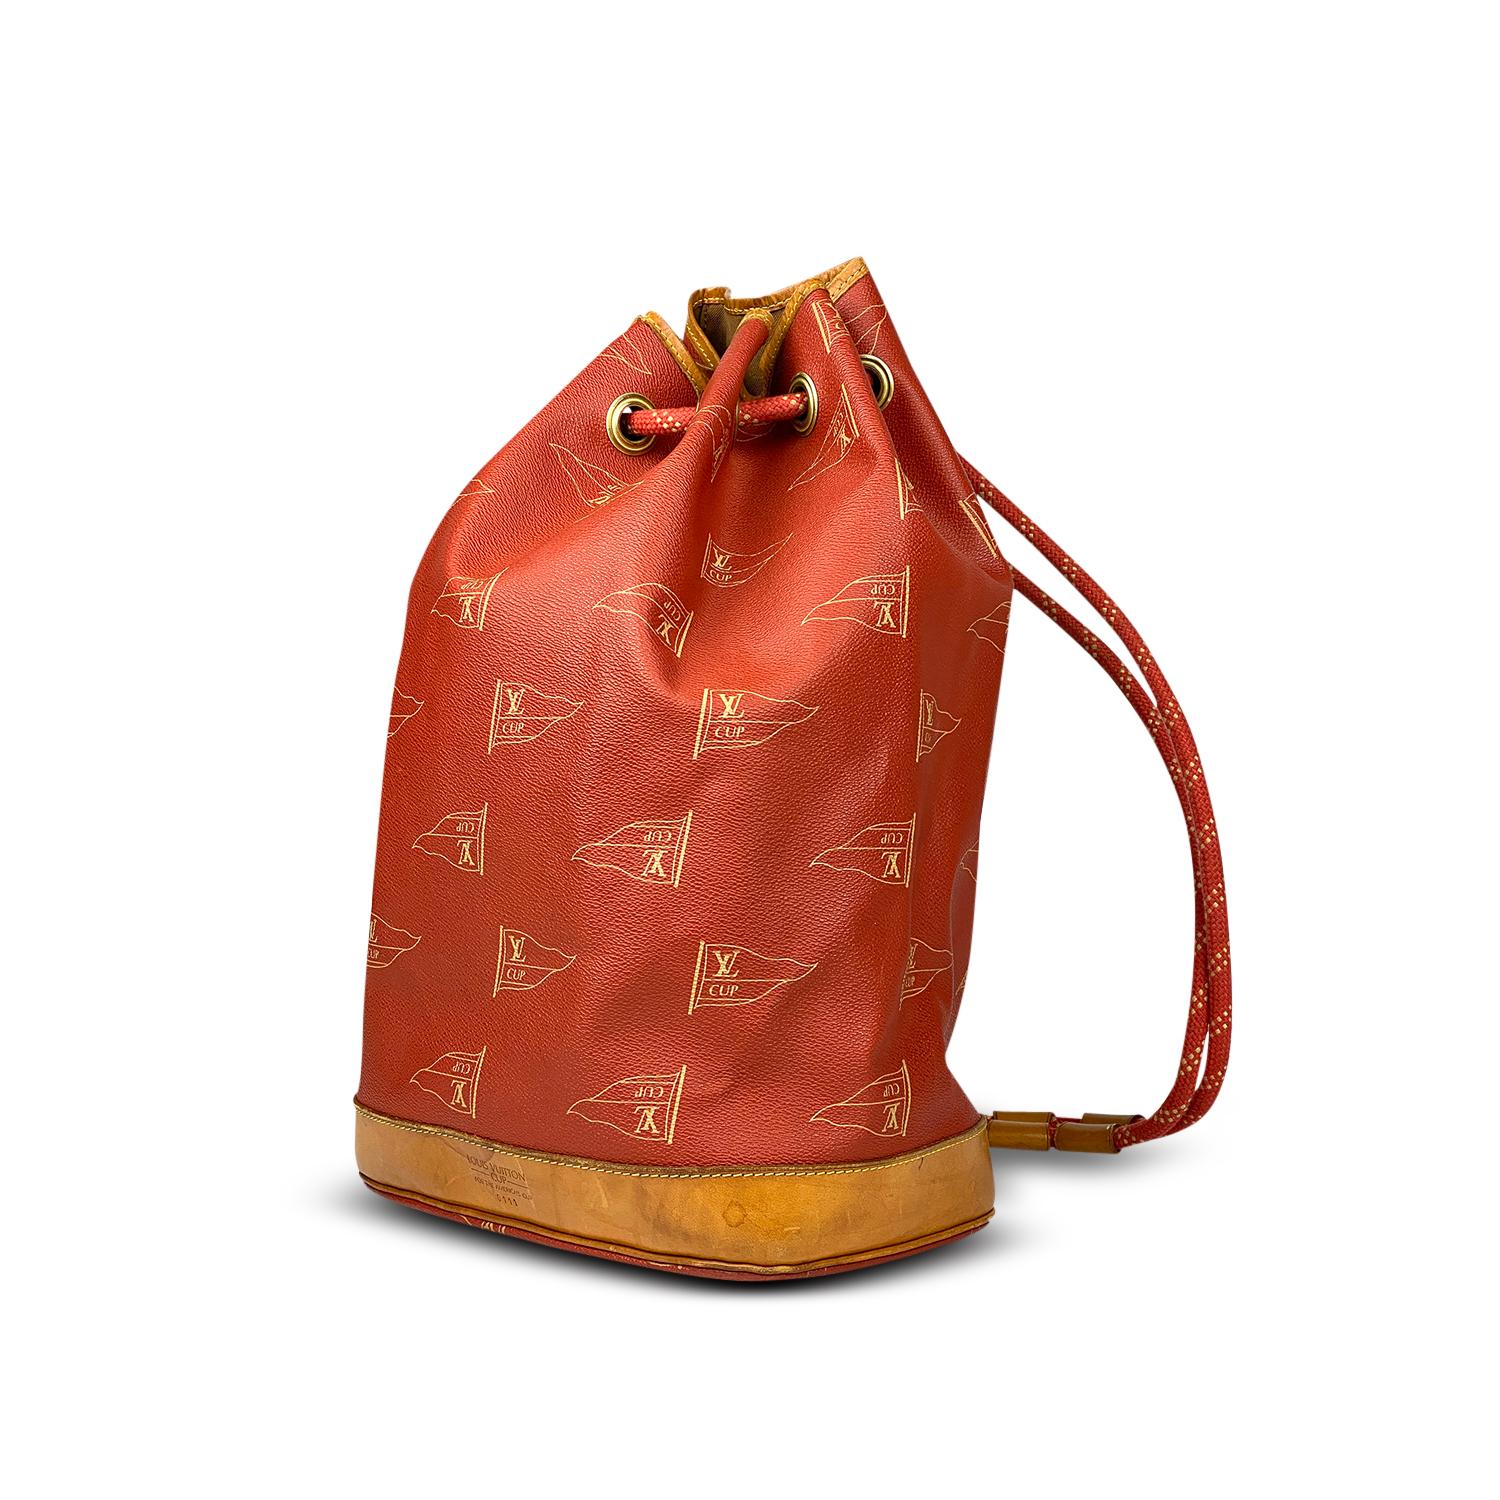 Brick and tan coated canvas Louis Vuitton Americas Cup Saint-Tropez Bag LE with

– Brick and tan coated canvas Louis Vuitton Americas Cup Saint-Tropez Bag LE with
– Tan Vachetta leather trim
– Dual rope shoulder straps
– Debossed logo at front
–